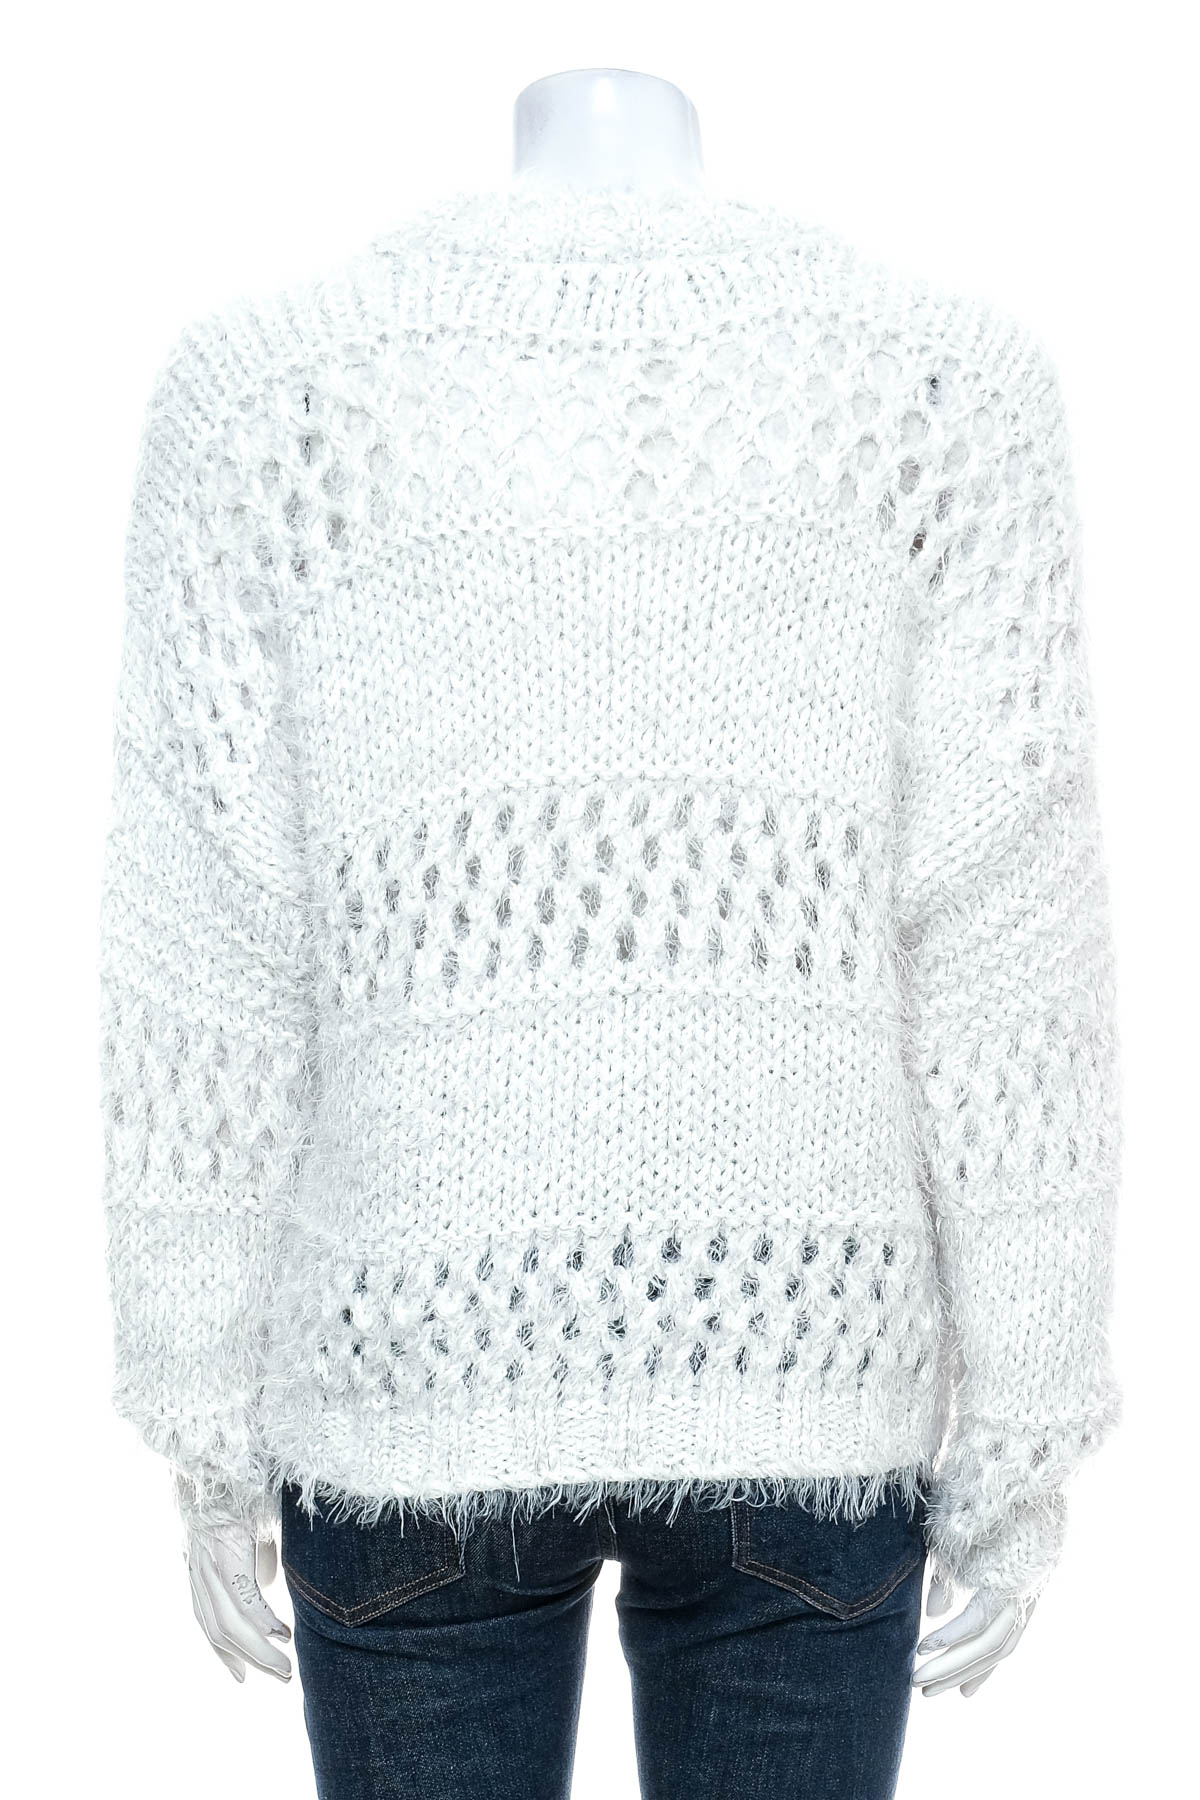 Women's sweater - Costes - 1